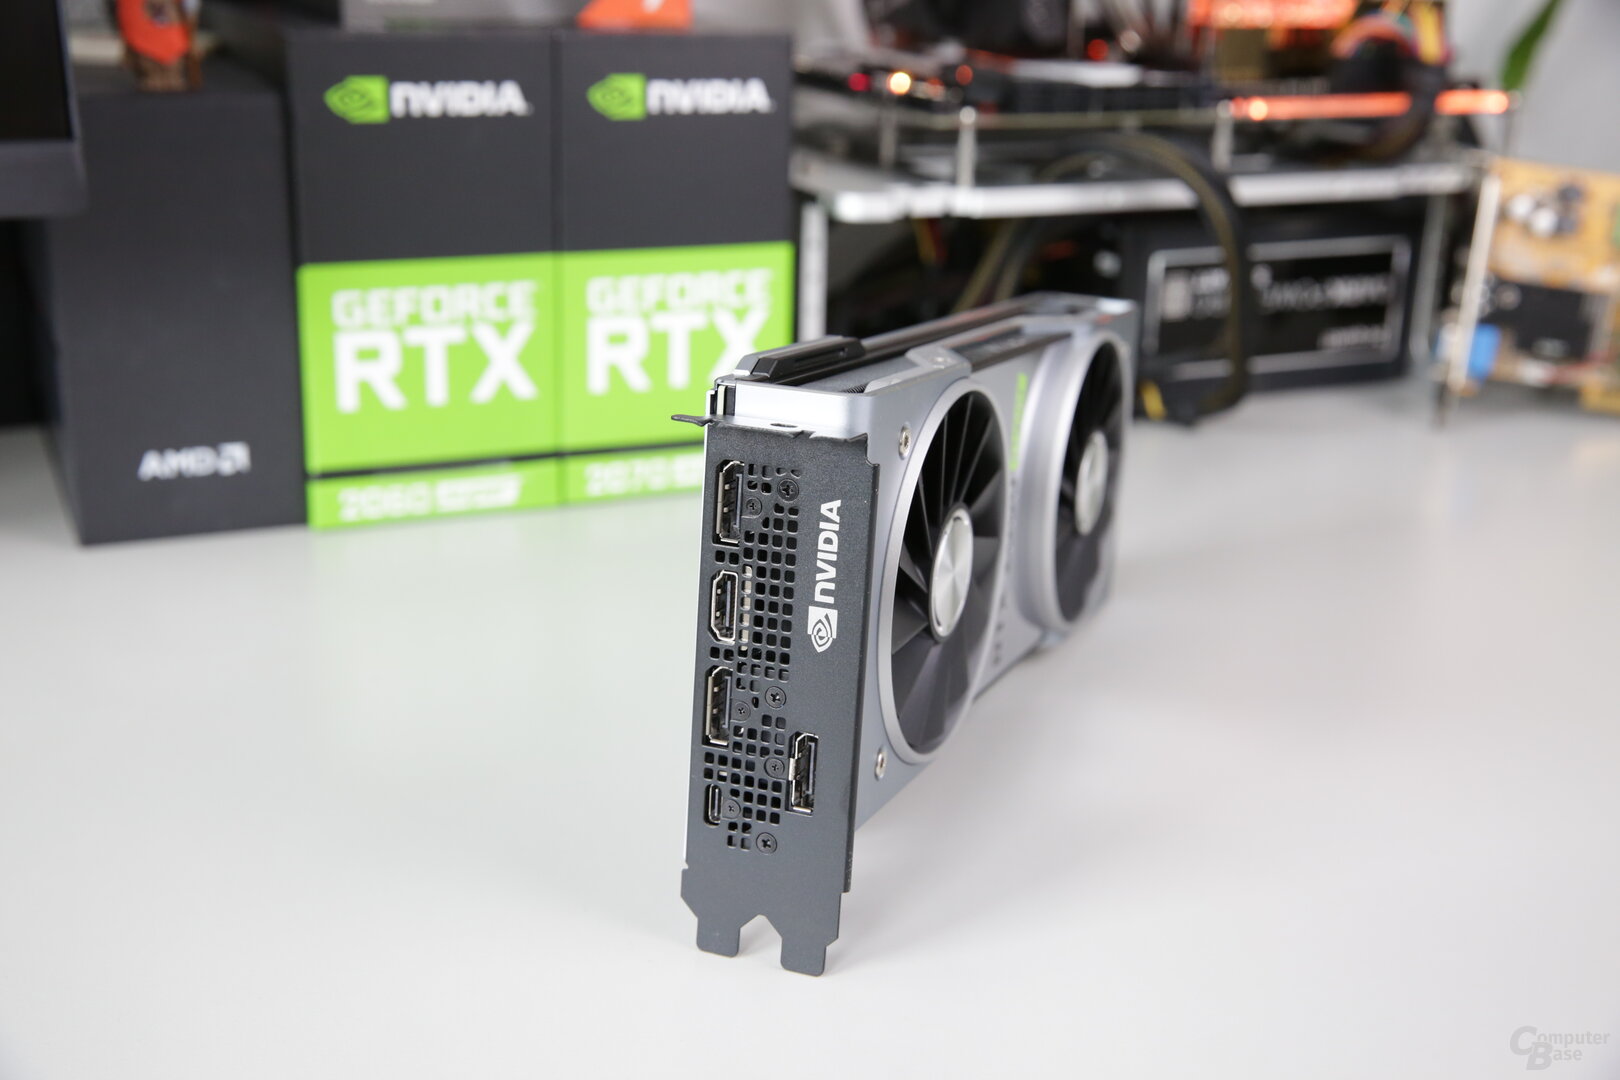 Nvidia GeForce RTX 2080 Super FE in the test